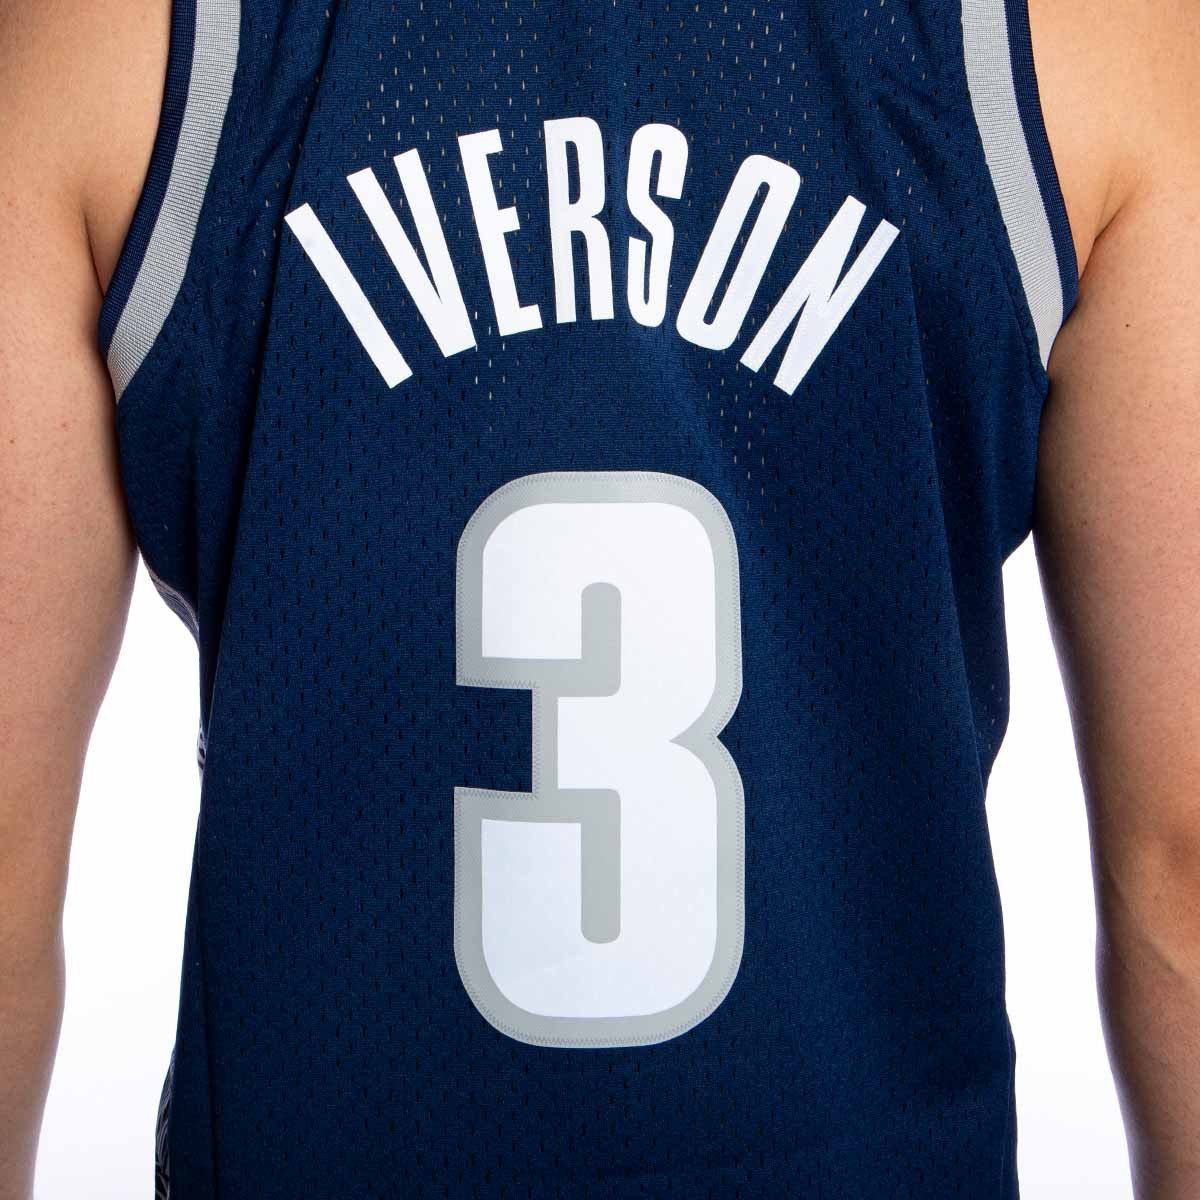 iverson georgetown jersey mitchell and ness